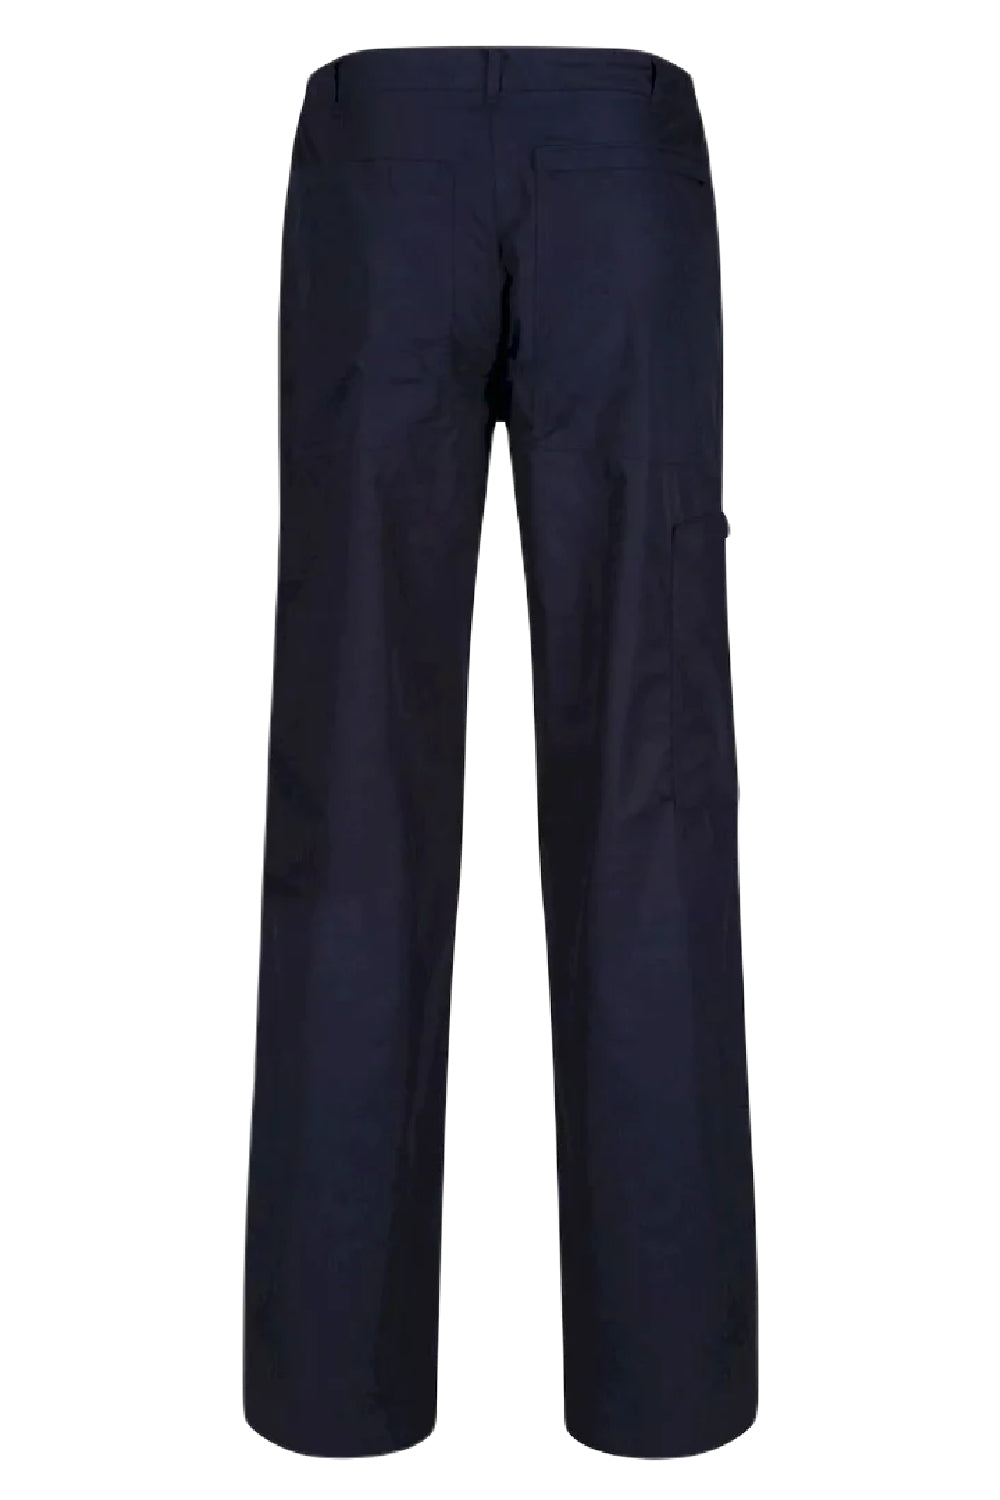 Regatta Mens Action Trousers in Navy 